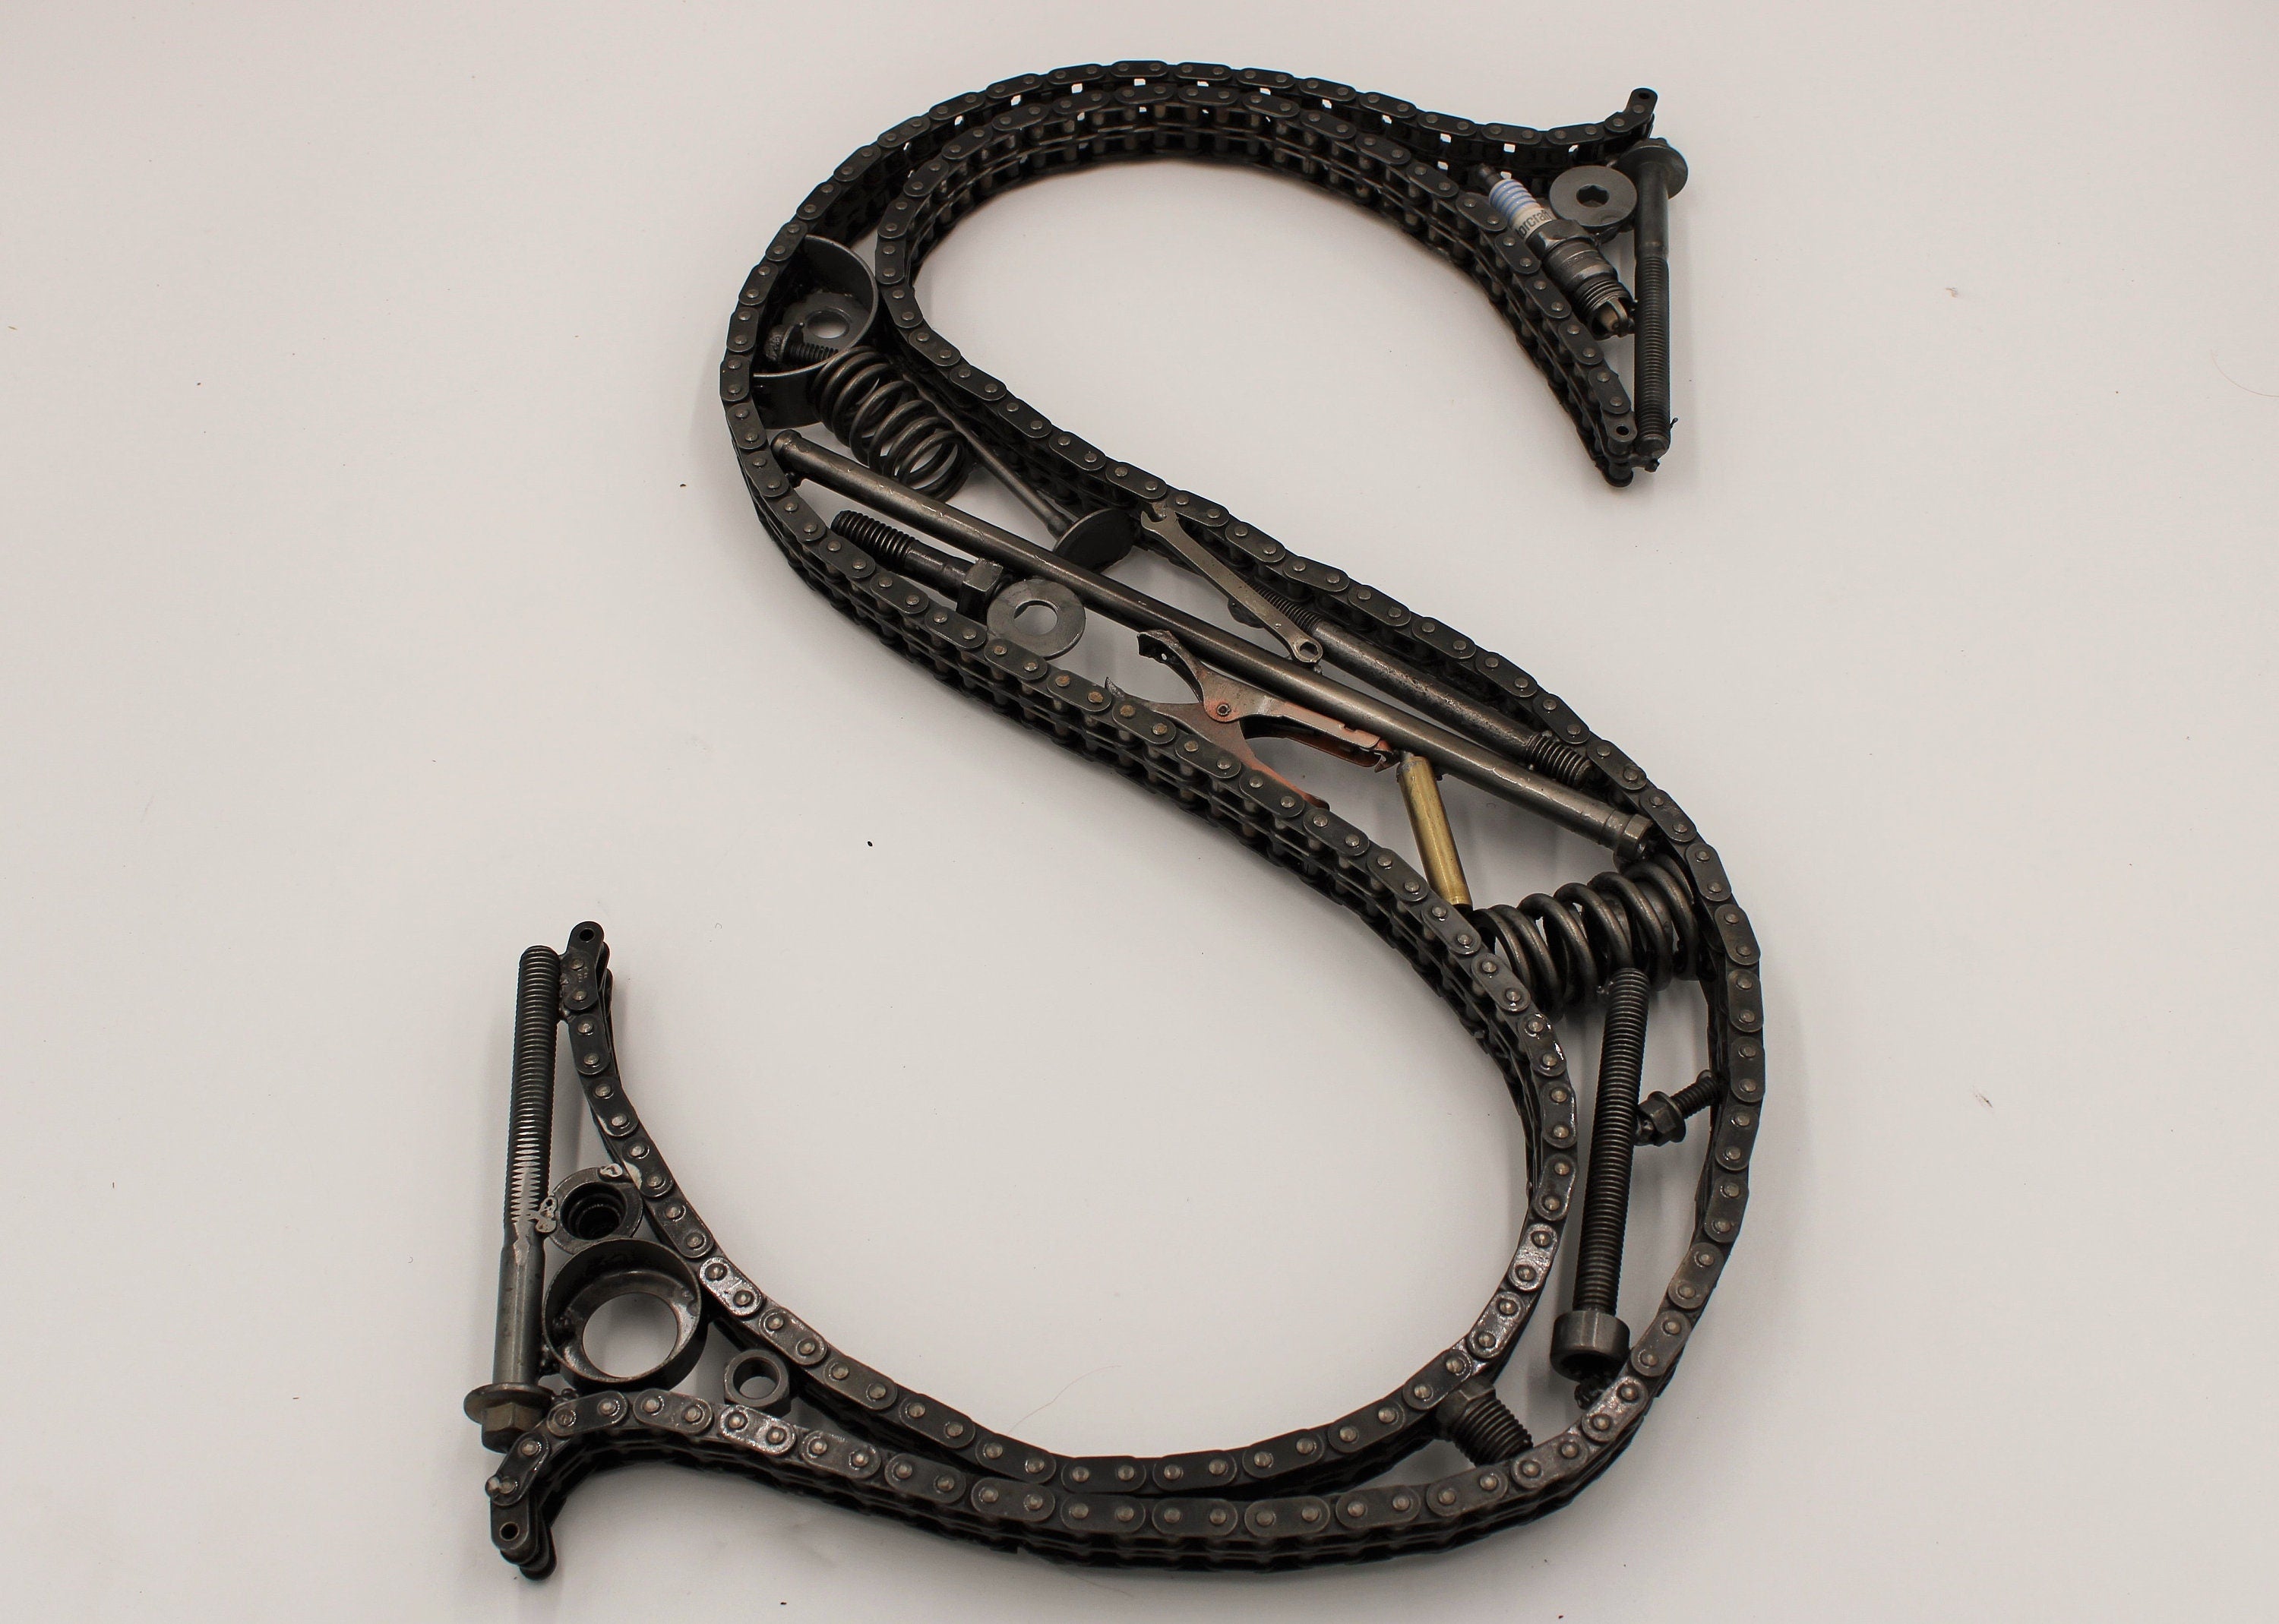 A letter S made out of real car parts, outlined with a car's timing chain.